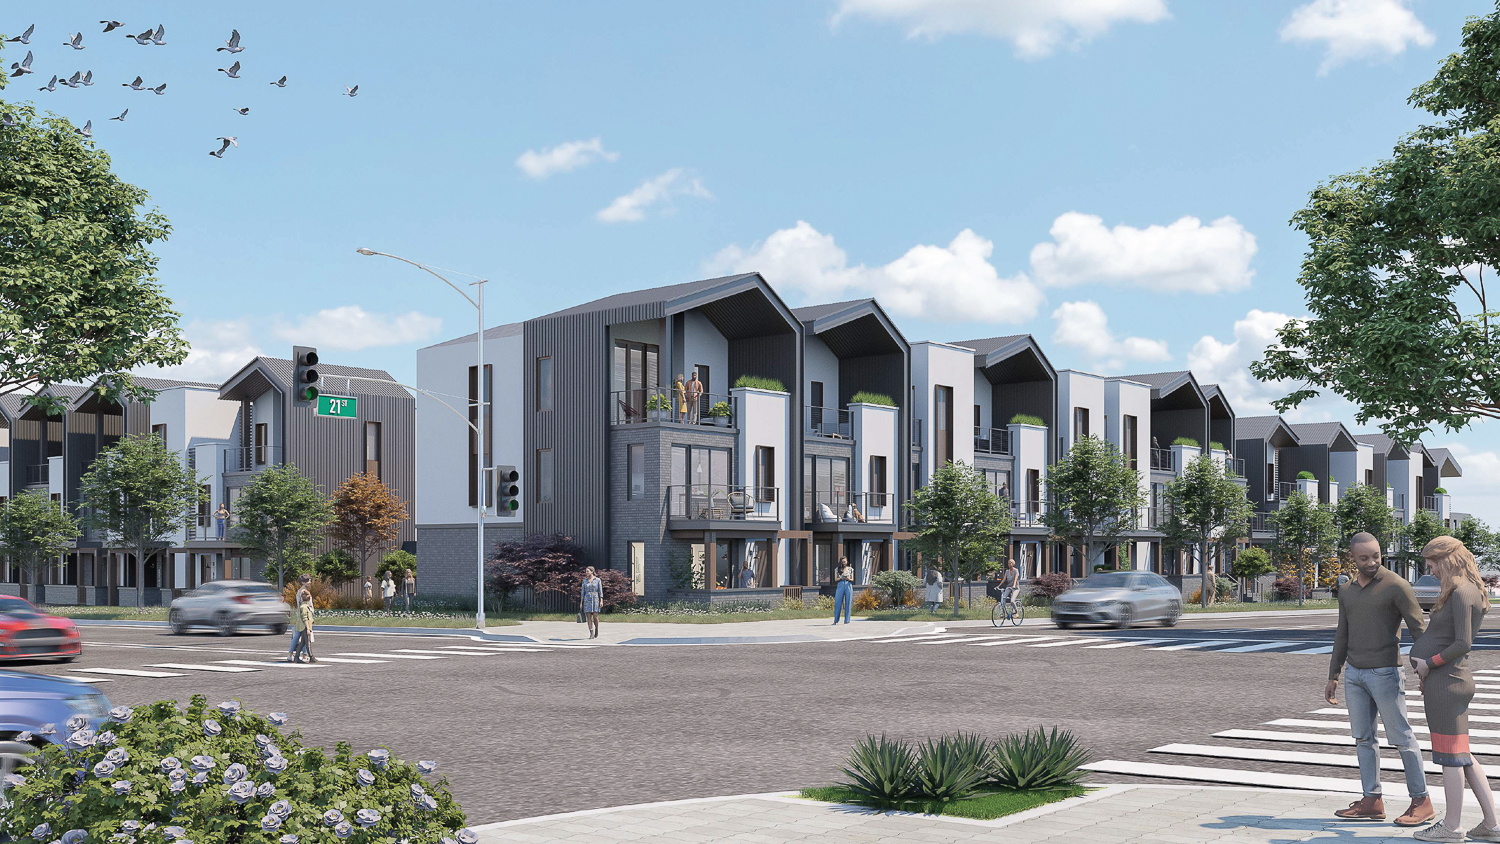 2100 Q Street townhomes, rendering by TCA Architects